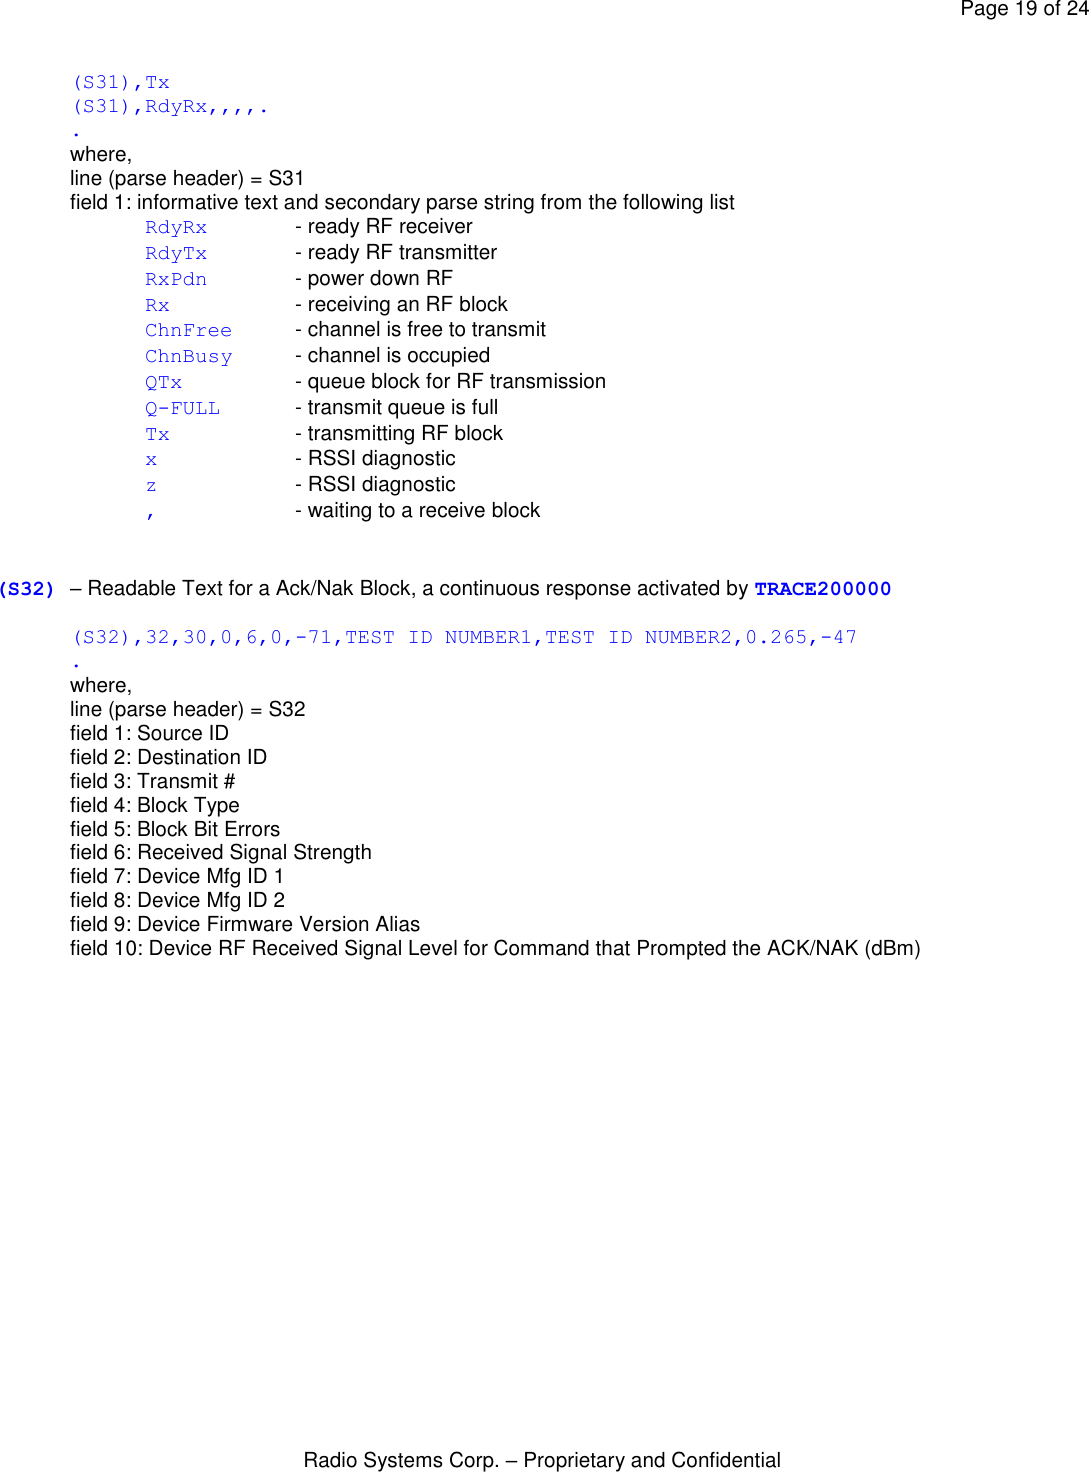 Page 19 of 24 Radio Systems Corp. – Proprietary and Confidential  (S31),Tx (S31),RdyRx,,,,. . where, line (parse header) = S31 field 1: informative text and secondary parse string from the following list RdyRx   - ready RF receiver RdyTx   - ready RF transmitter RxPdn   - power down RF Rx    - receiving an RF block ChnFree - channel is free to transmit ChnBusy - channel is occupied QTx    - queue block for RF transmission Q-FULL - transmit queue is full Tx    - transmitting RF block x    - RSSI diagnostic z    - RSSI diagnostic ,    - waiting to a receive block   (S32) – Readable Text for a Ack/Nak Block, a continuous response activated by TRACE200000  (S32),32,30,0,6,0,-71,TEST ID NUMBER1,TEST ID NUMBER2,0.265,-47 . where, line (parse header) = S32 field 1: Source ID field 2: Destination ID field 3: Transmit # field 4: Block Type field 5: Block Bit Errors field 6: Received Signal Strength field 7: Device Mfg ID 1 field 8: Device Mfg ID 2 field 9: Device Firmware Version Alias field 10: Device RF Received Signal Level for Command that Prompted the ACK/NAK (dBm) 